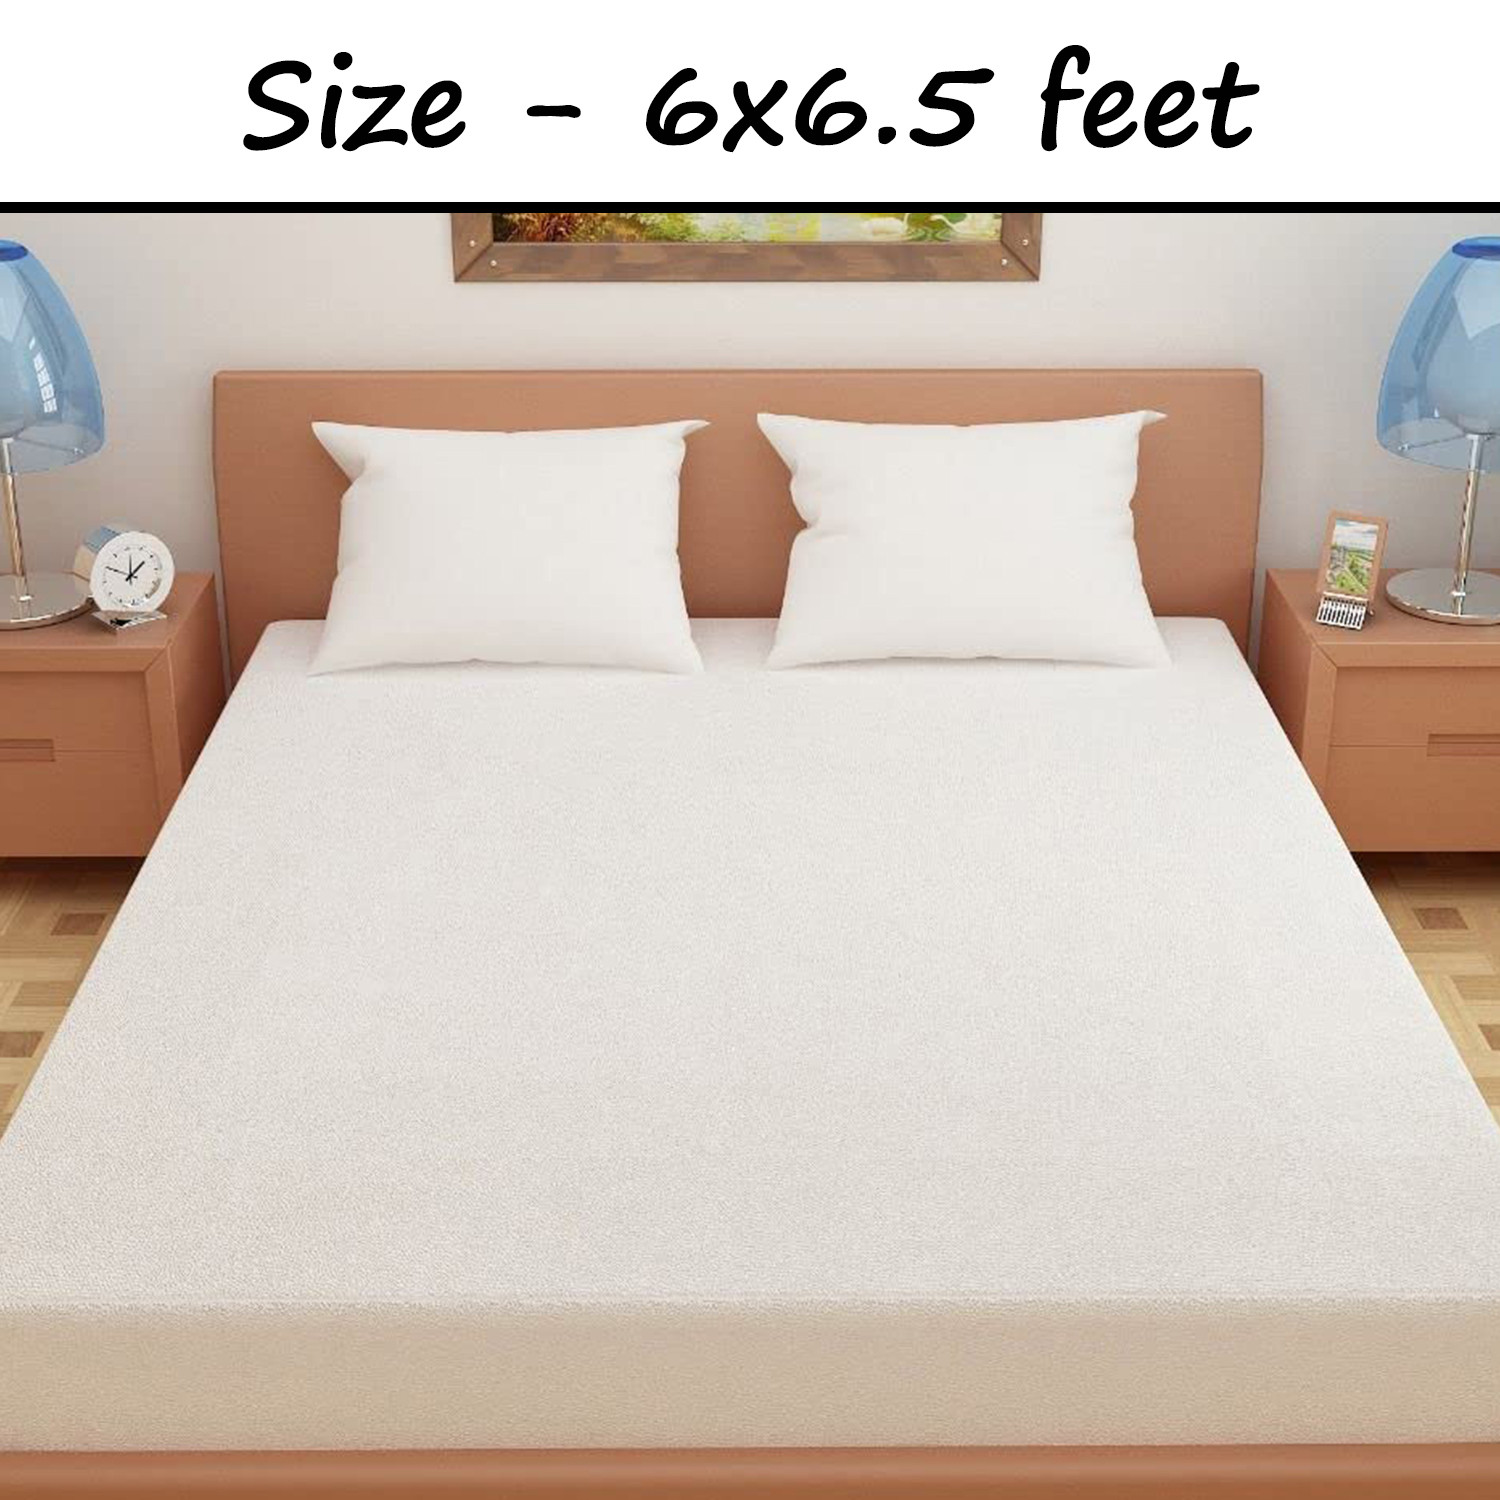 Kuber Industries Waterproof Double Bed Mattress Cover|Breathable Terry Cotton Surface & Elastic Fitted Mattress Protector,6 x 6.5 Ft. (White)